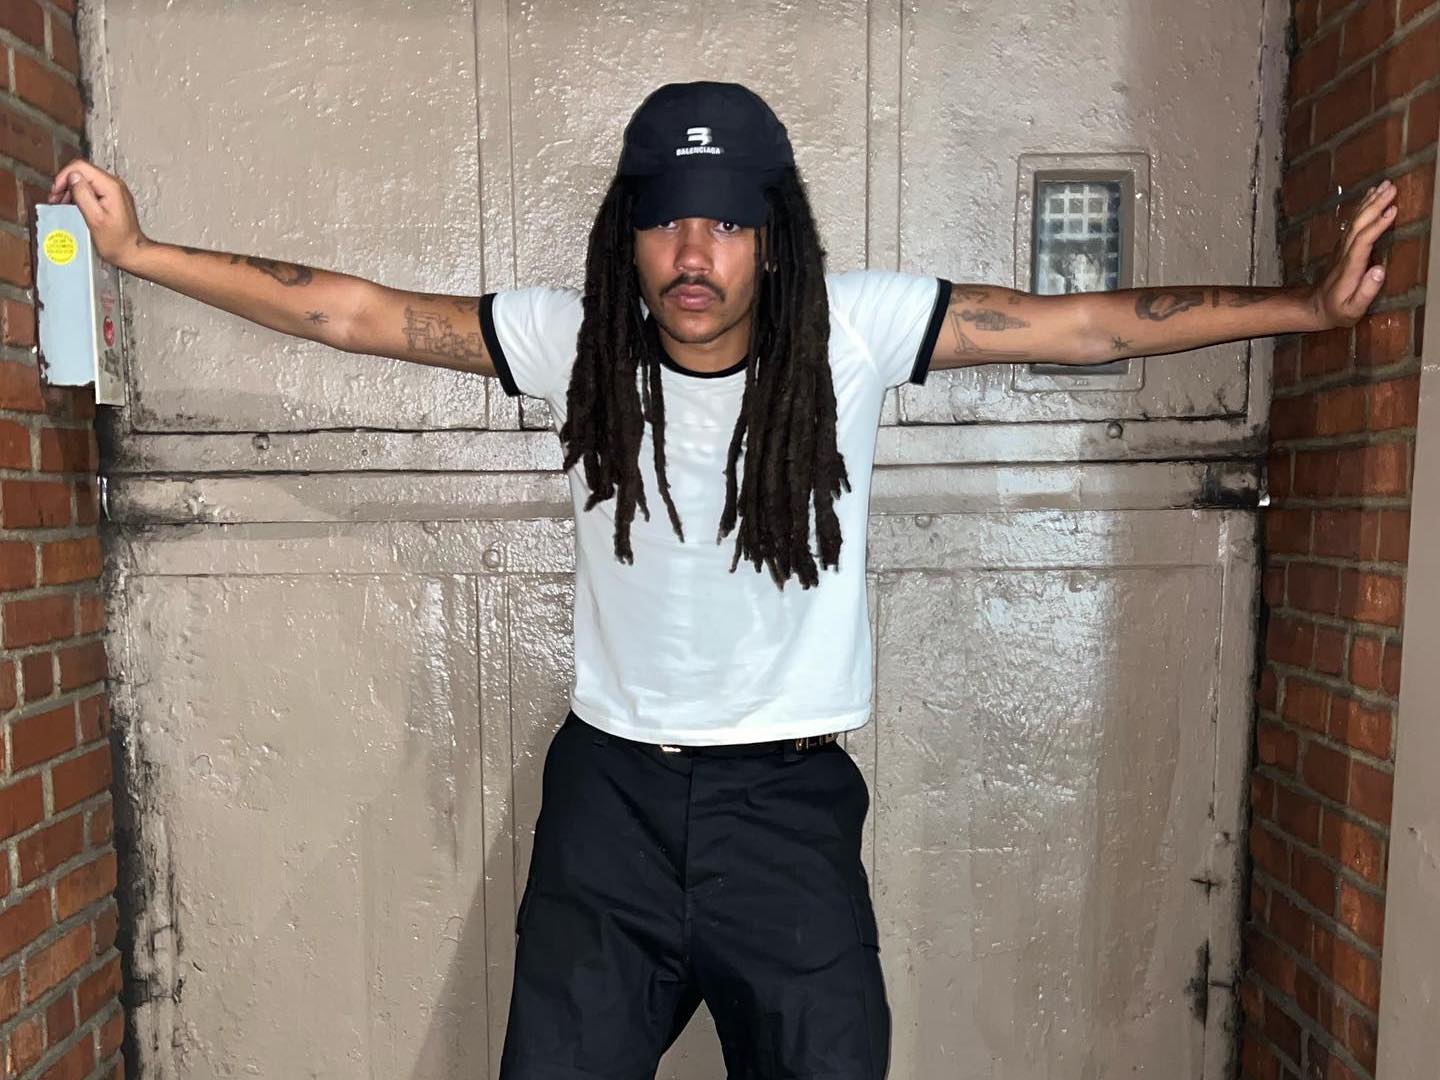 SPOTTED: Luka Sabbat is Back with Another Black & White Ensemble